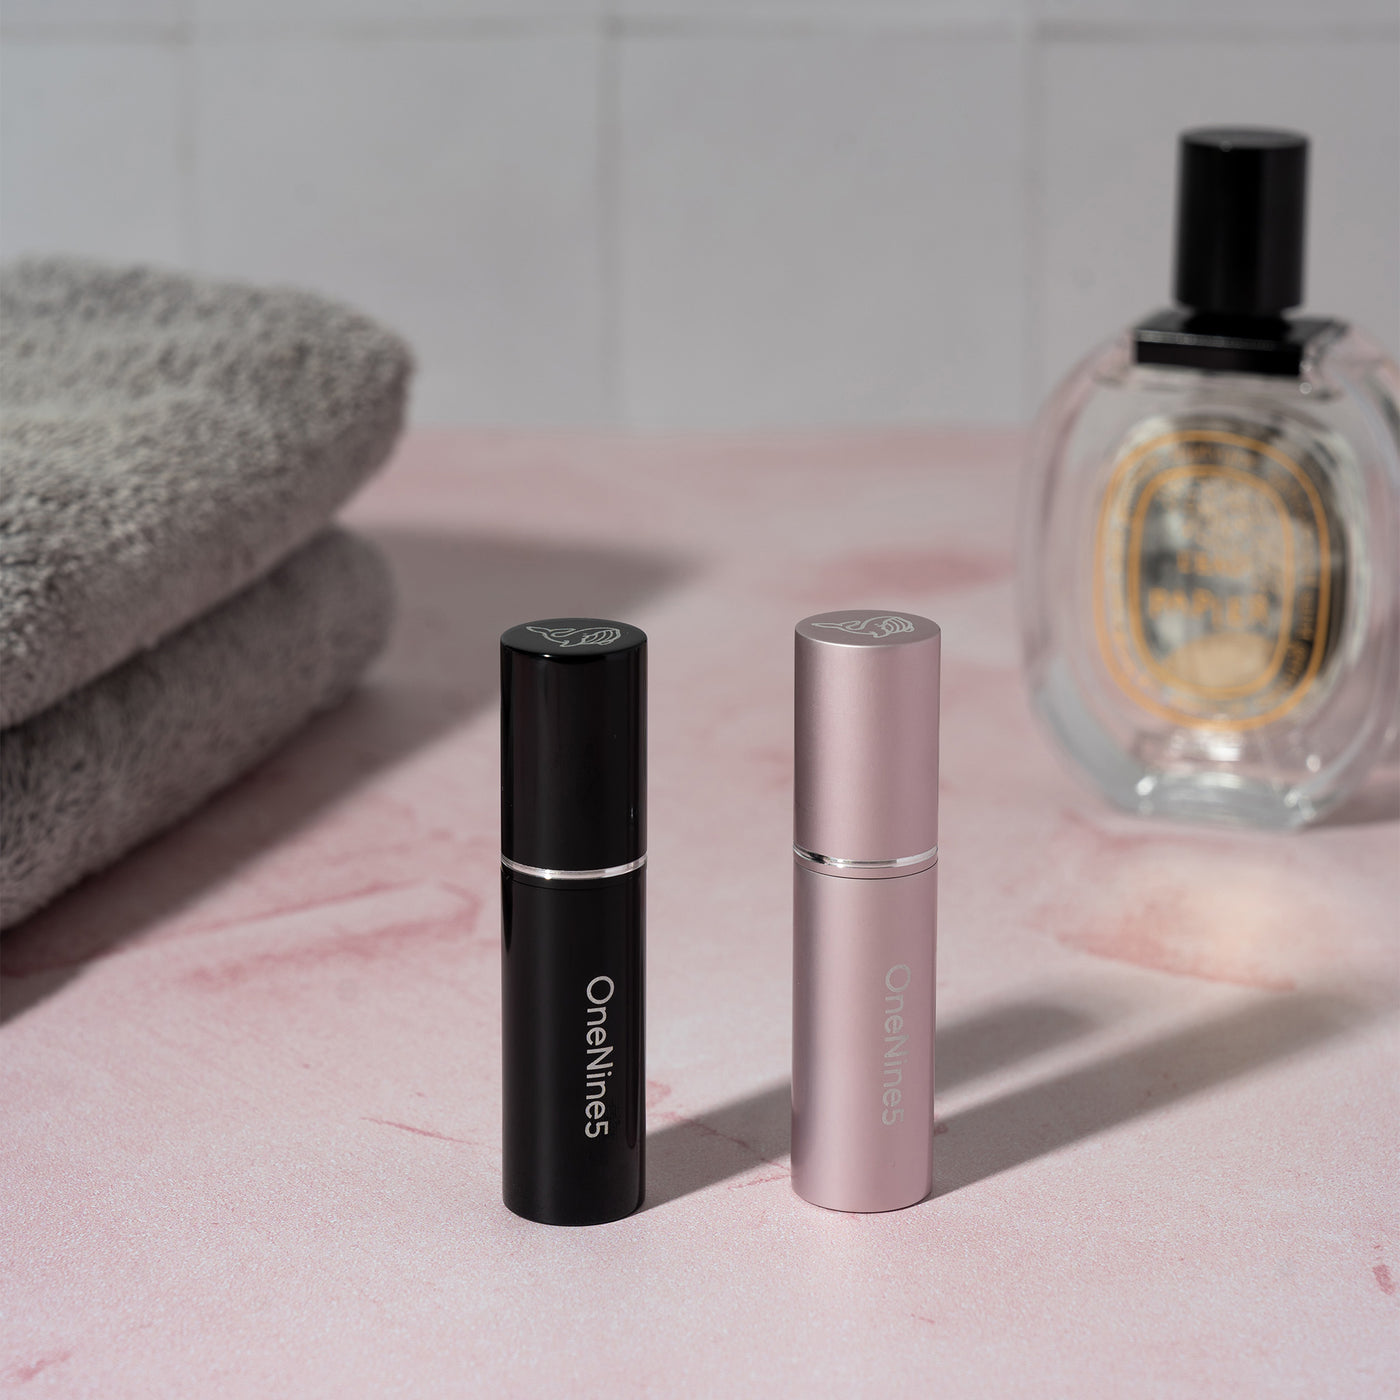 A black and pink OneNine5 refillable perfume/ aftershave bottle. With towels in the background and a 100ml perfume bottle